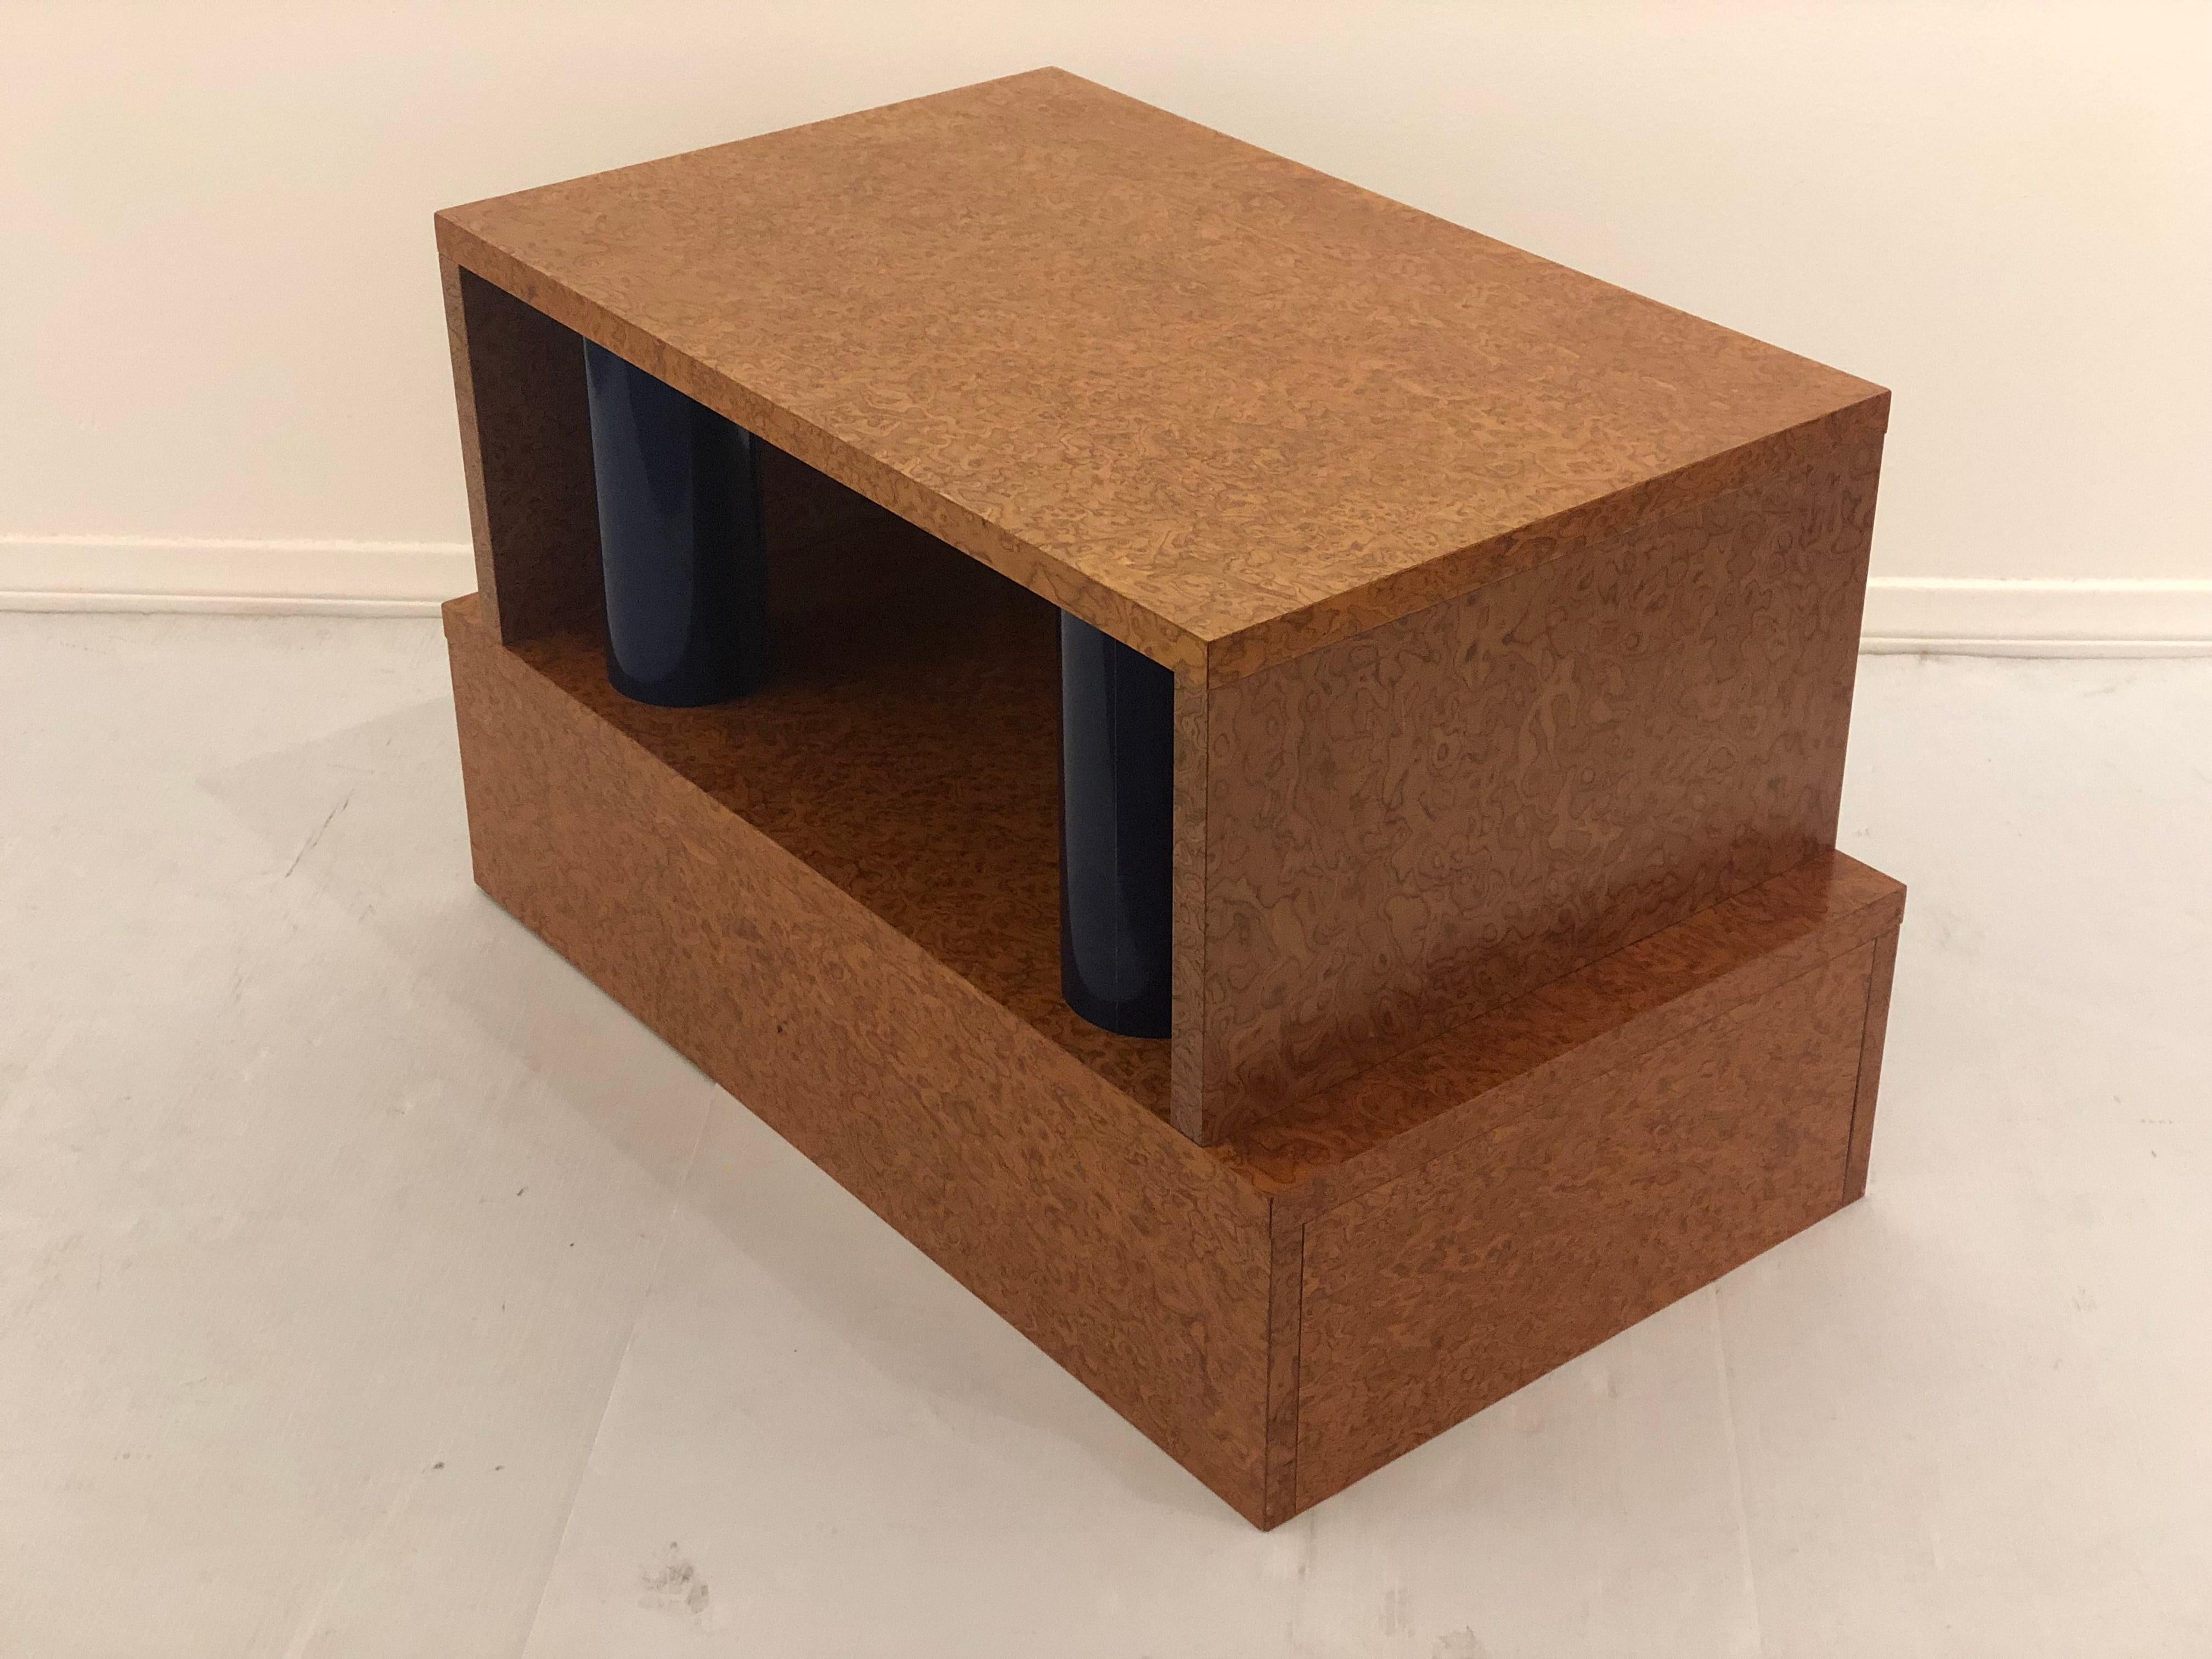 Post-Modern Rare Memphis Coffee Table by Ettore Sottsass from the Donau Line by Leitner